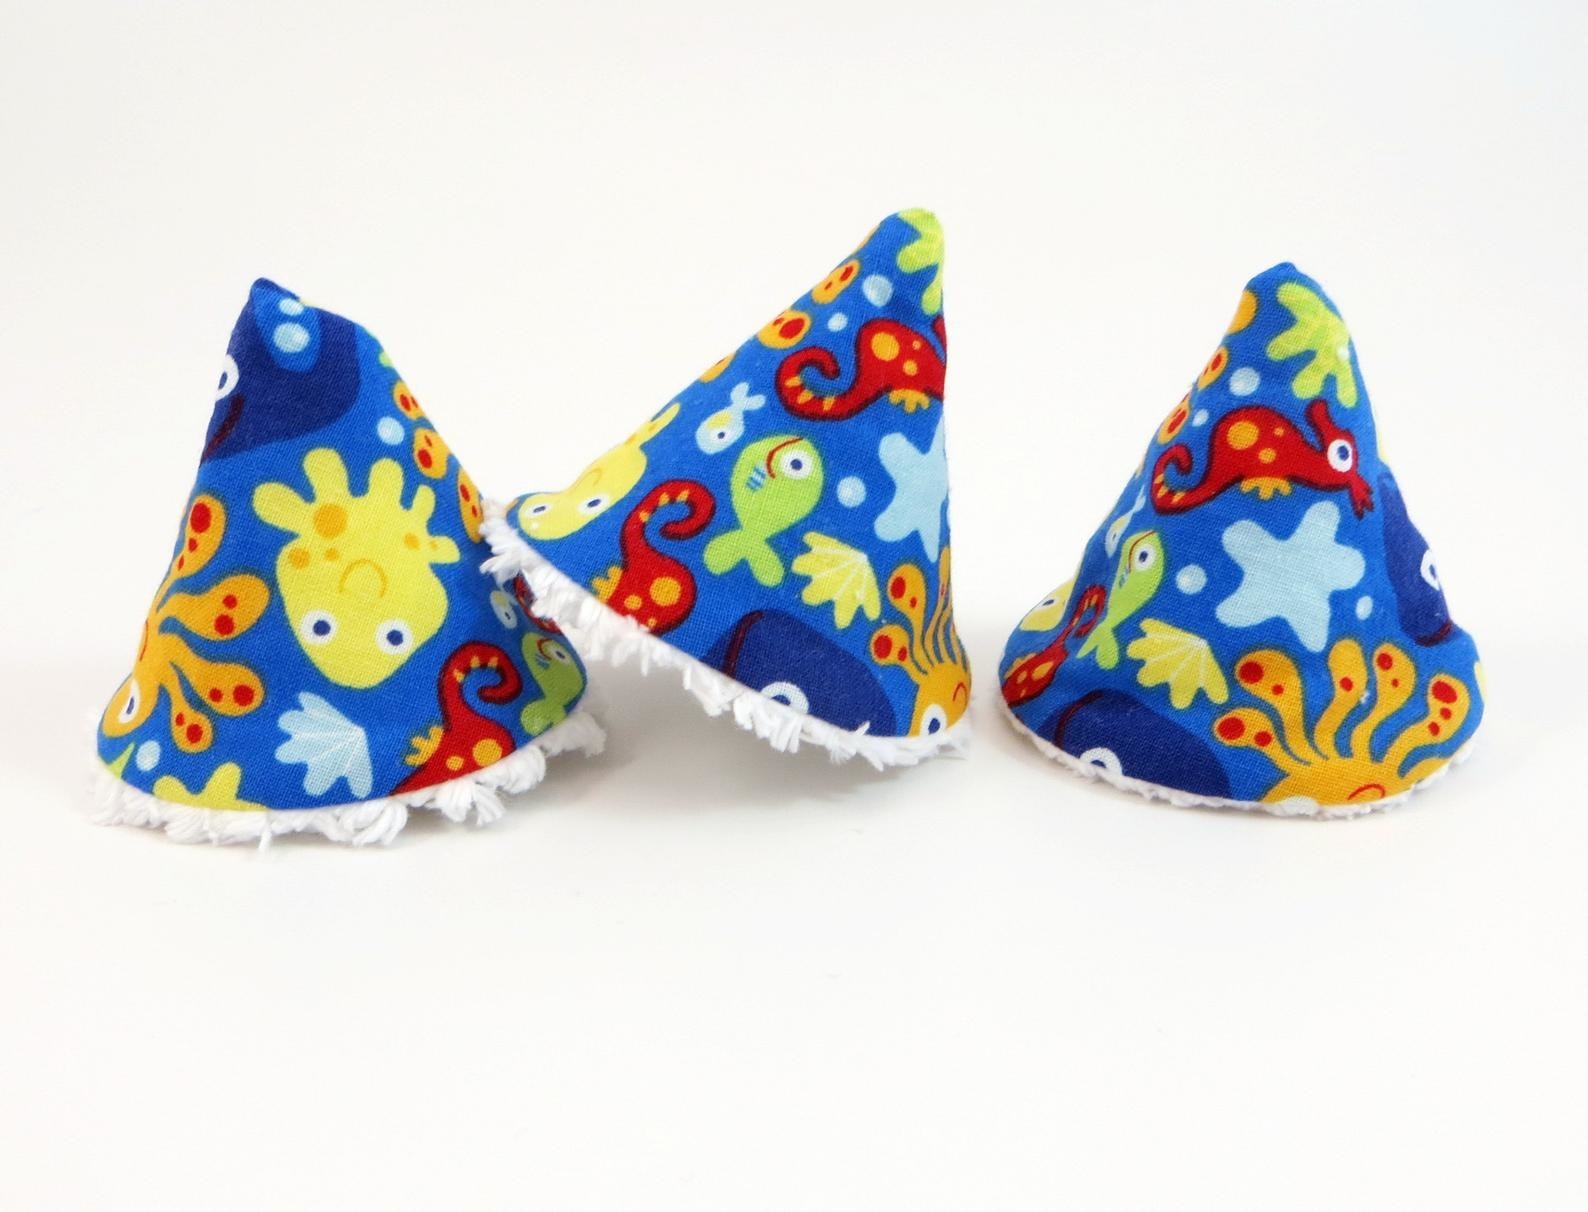 three cone-shaped covers made of fabric with a blue background and colorful sea animals all over them